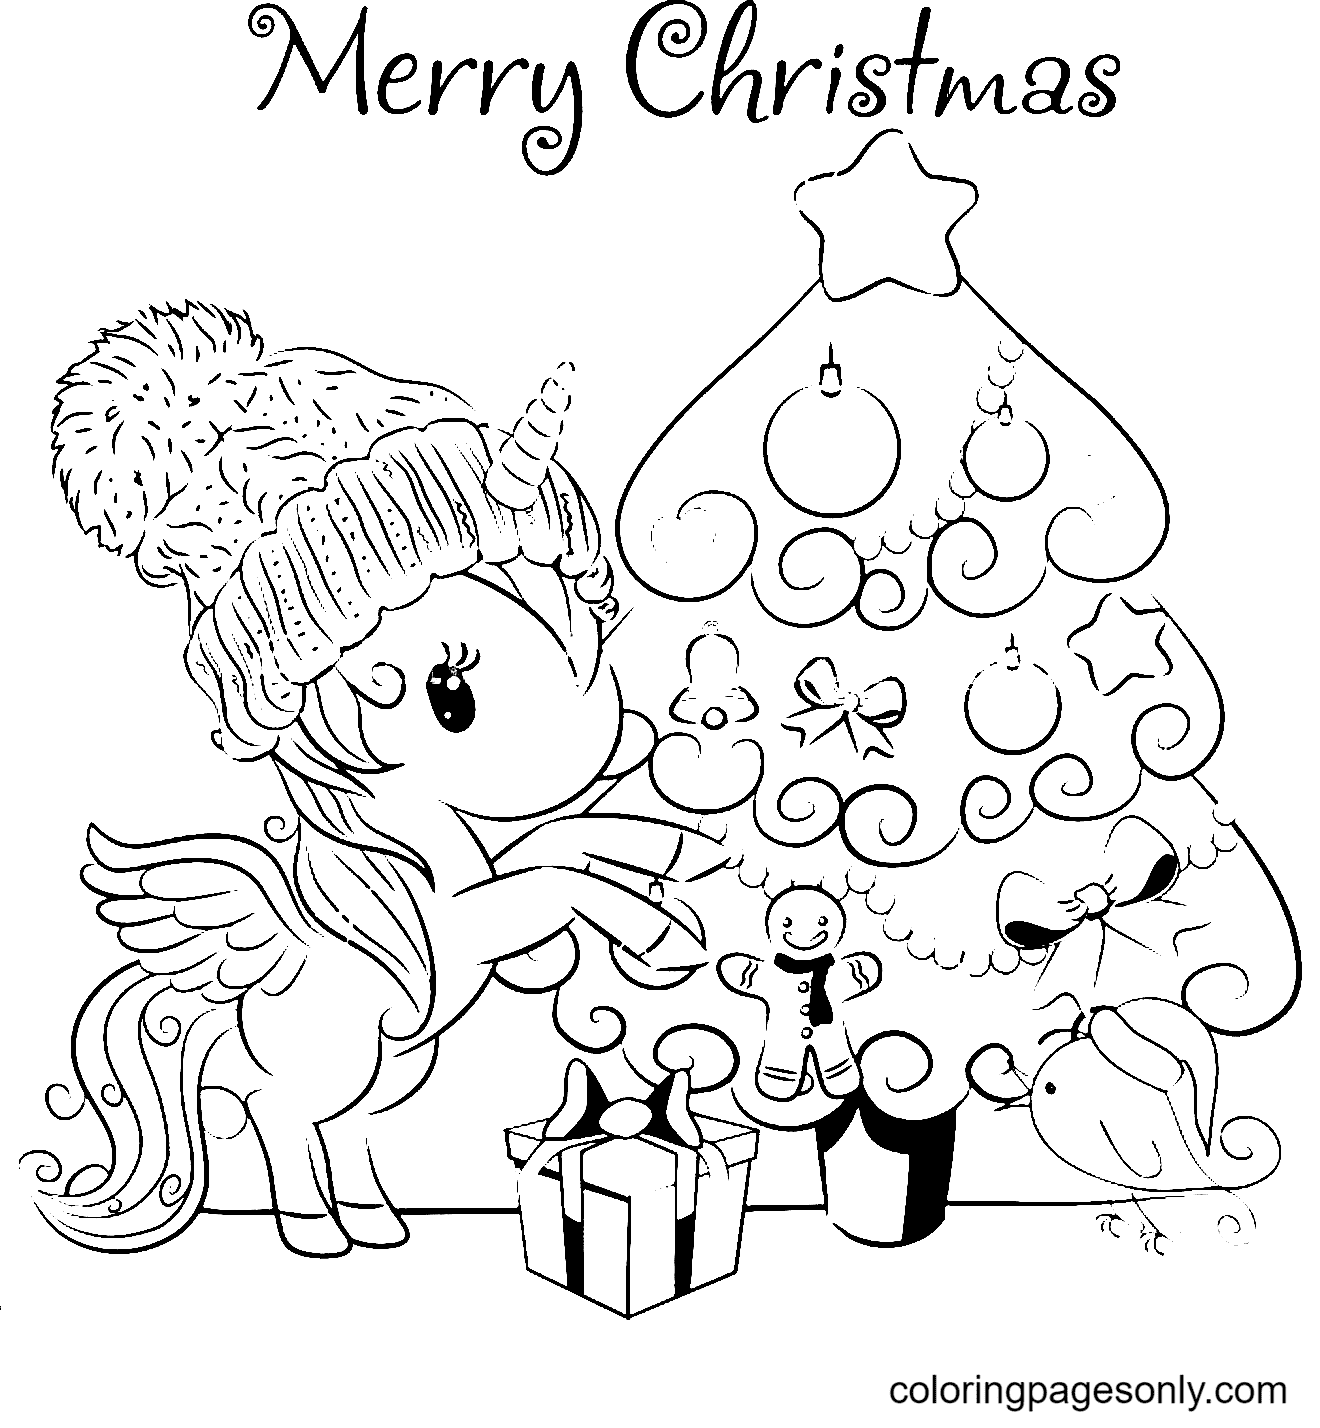 Christmas Tree and Unicorn Coloring Pages - Christmas Animals Coloring Pages  - Coloring Pages For Kids And Adults